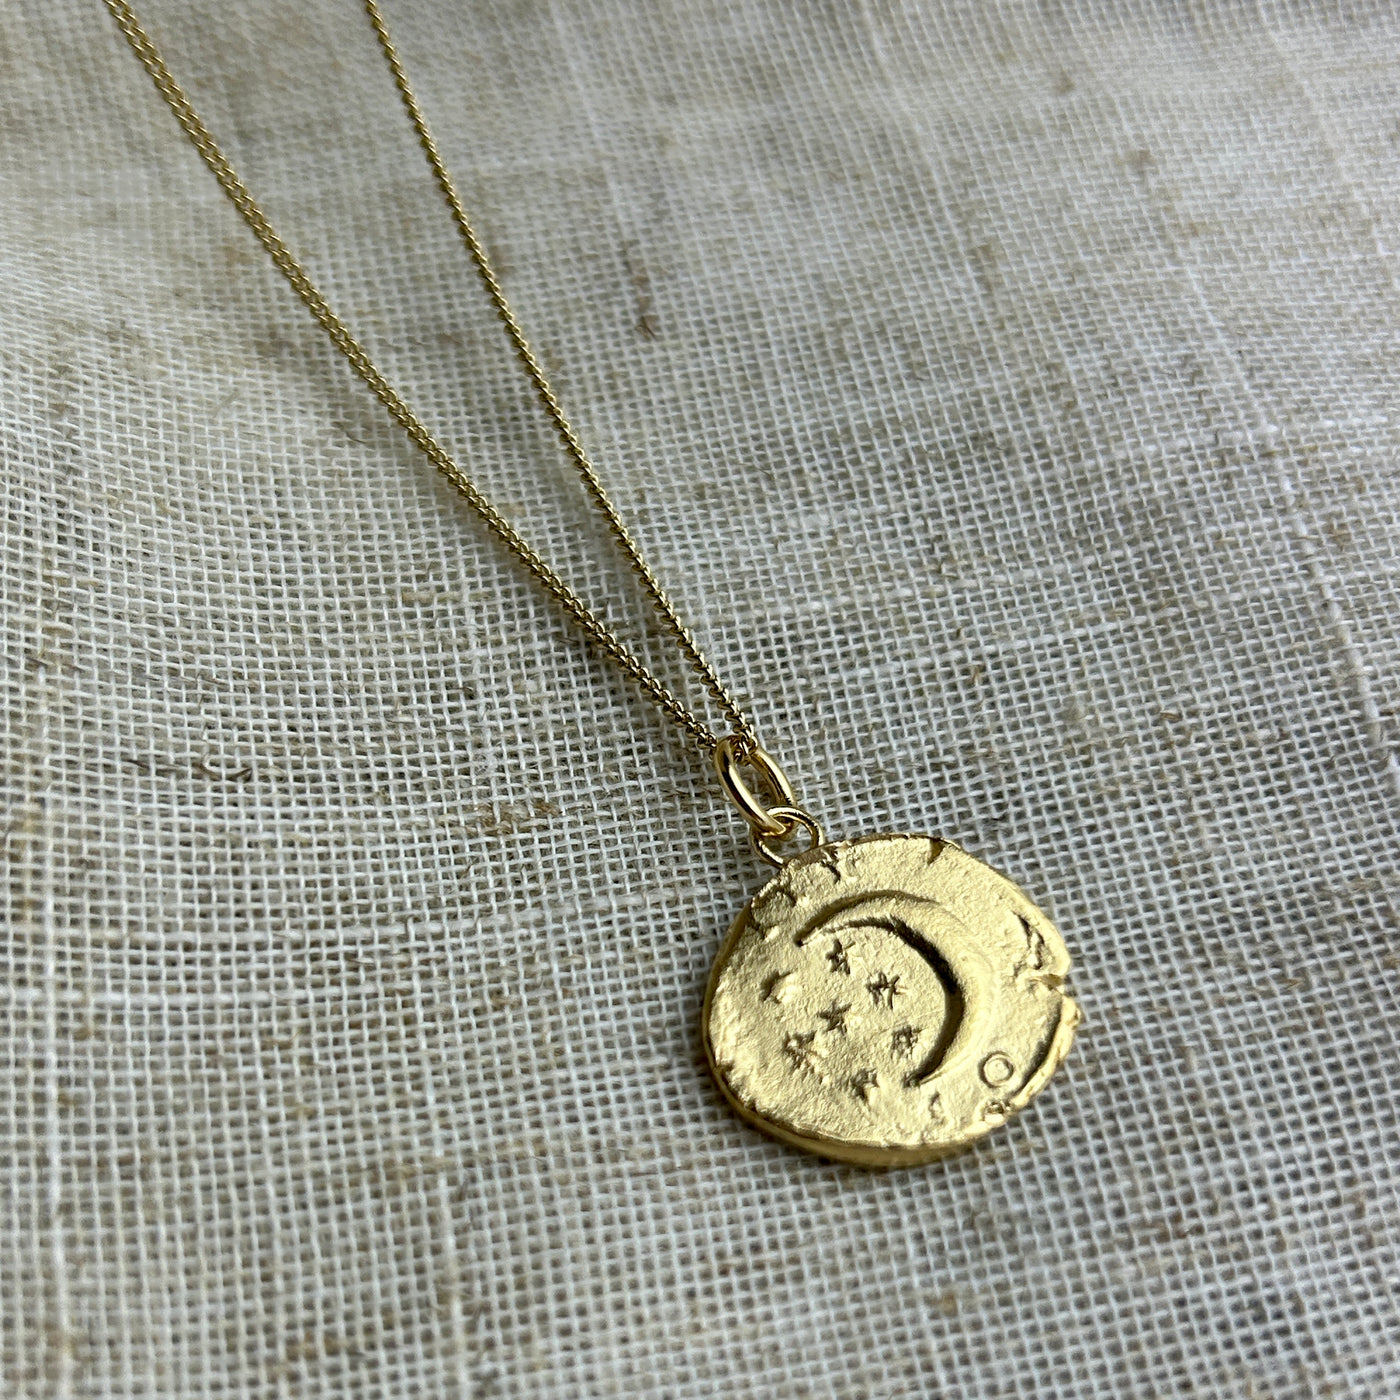 Gold Plated Dark Skies Crescent Moon Coin Pendant